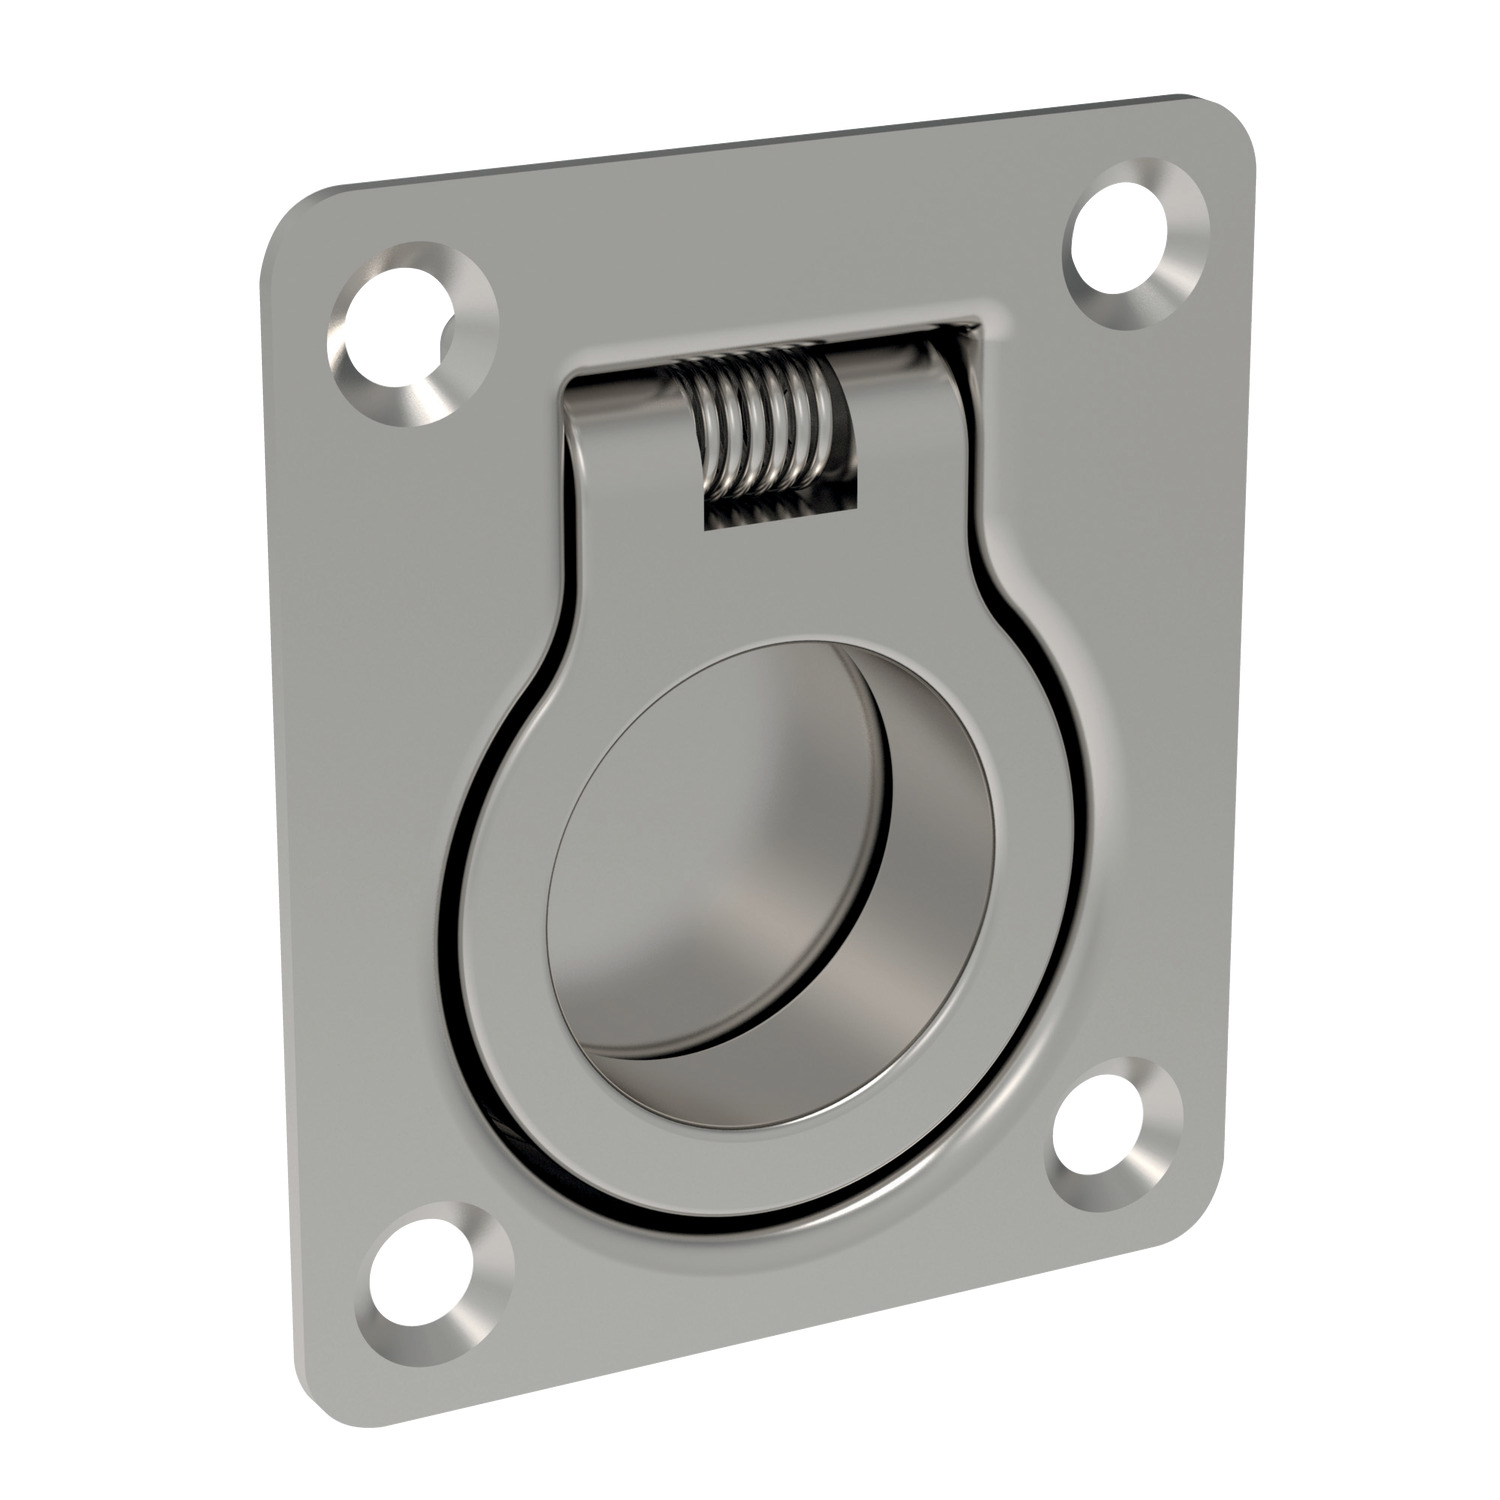 Ring Pulls, Recessed Made from AISI 304 stainless steel with a polished finish. Ideal for when space efficiency and minimising protrusions is a priority in your application.